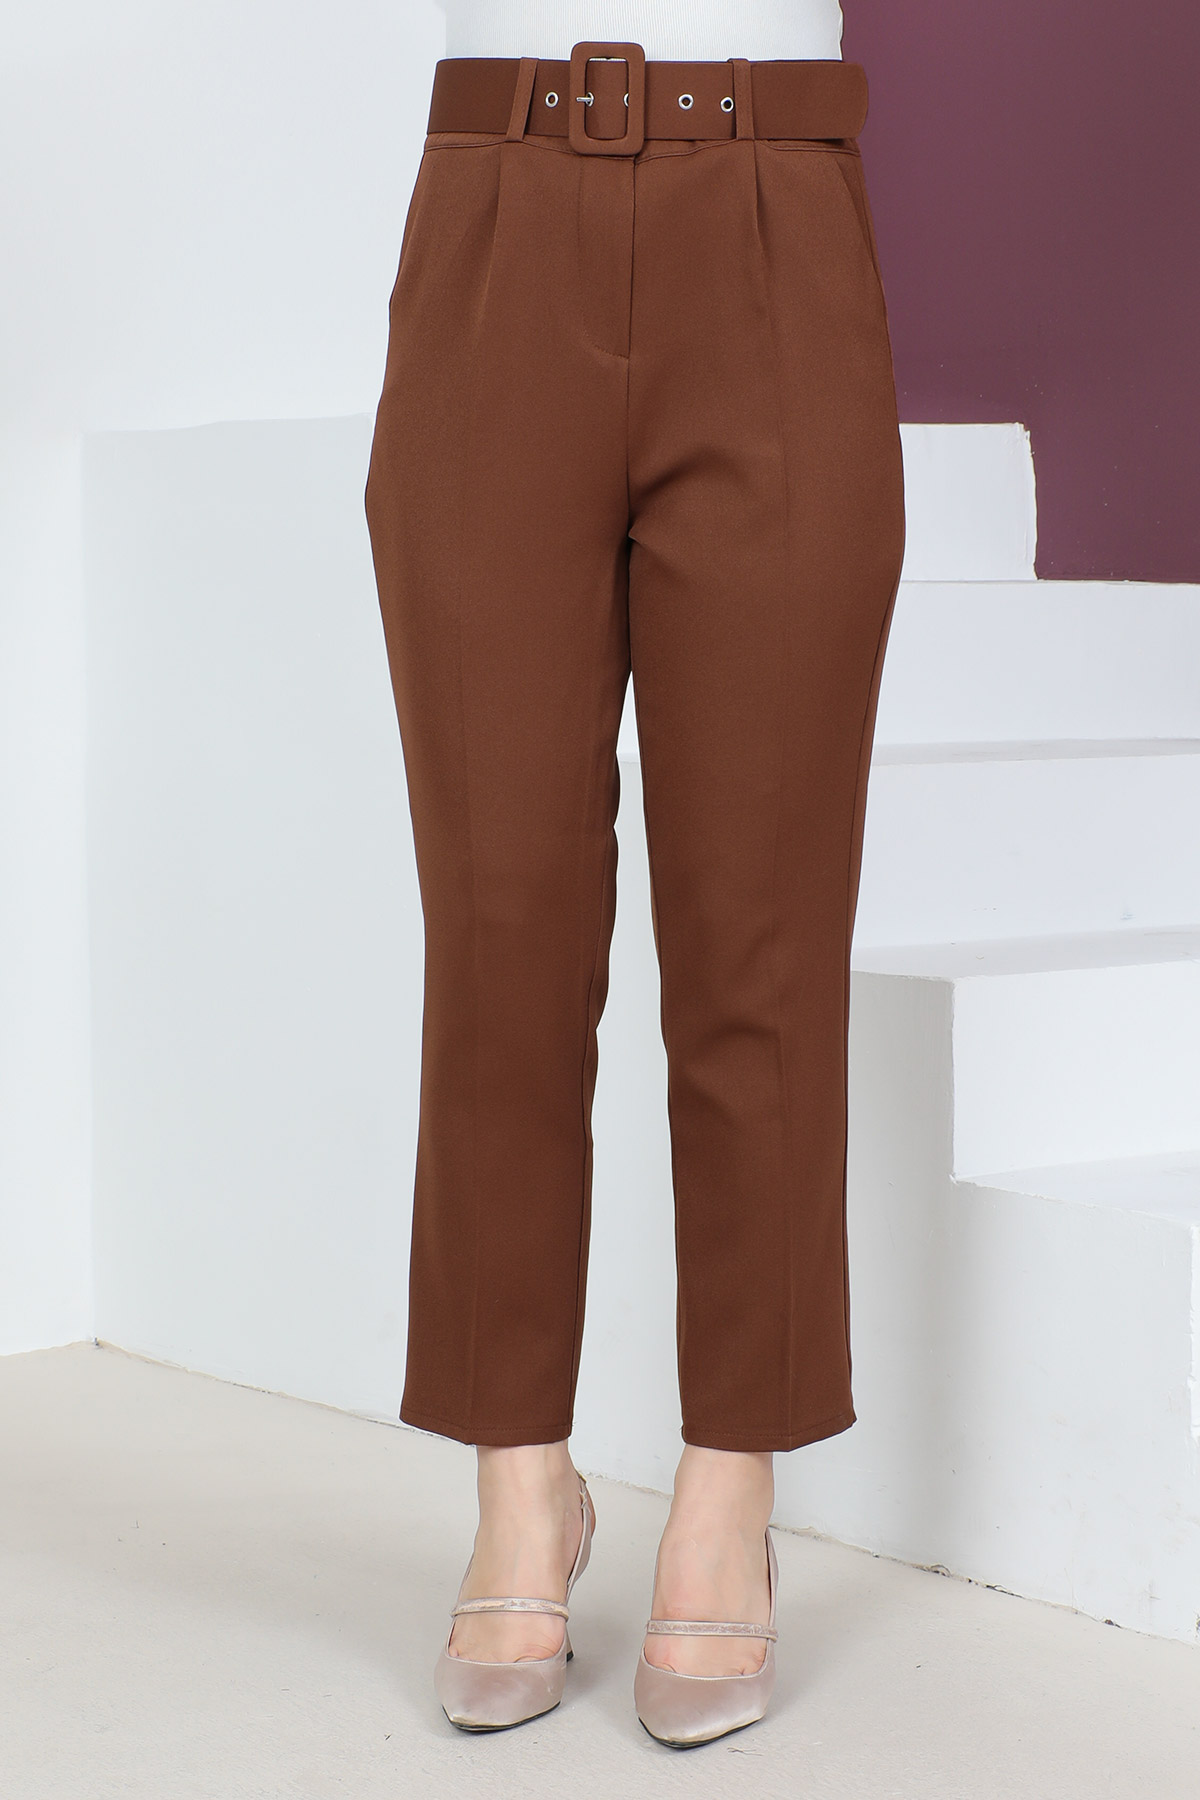 Arched Carrot Pants TSD221012 Brown